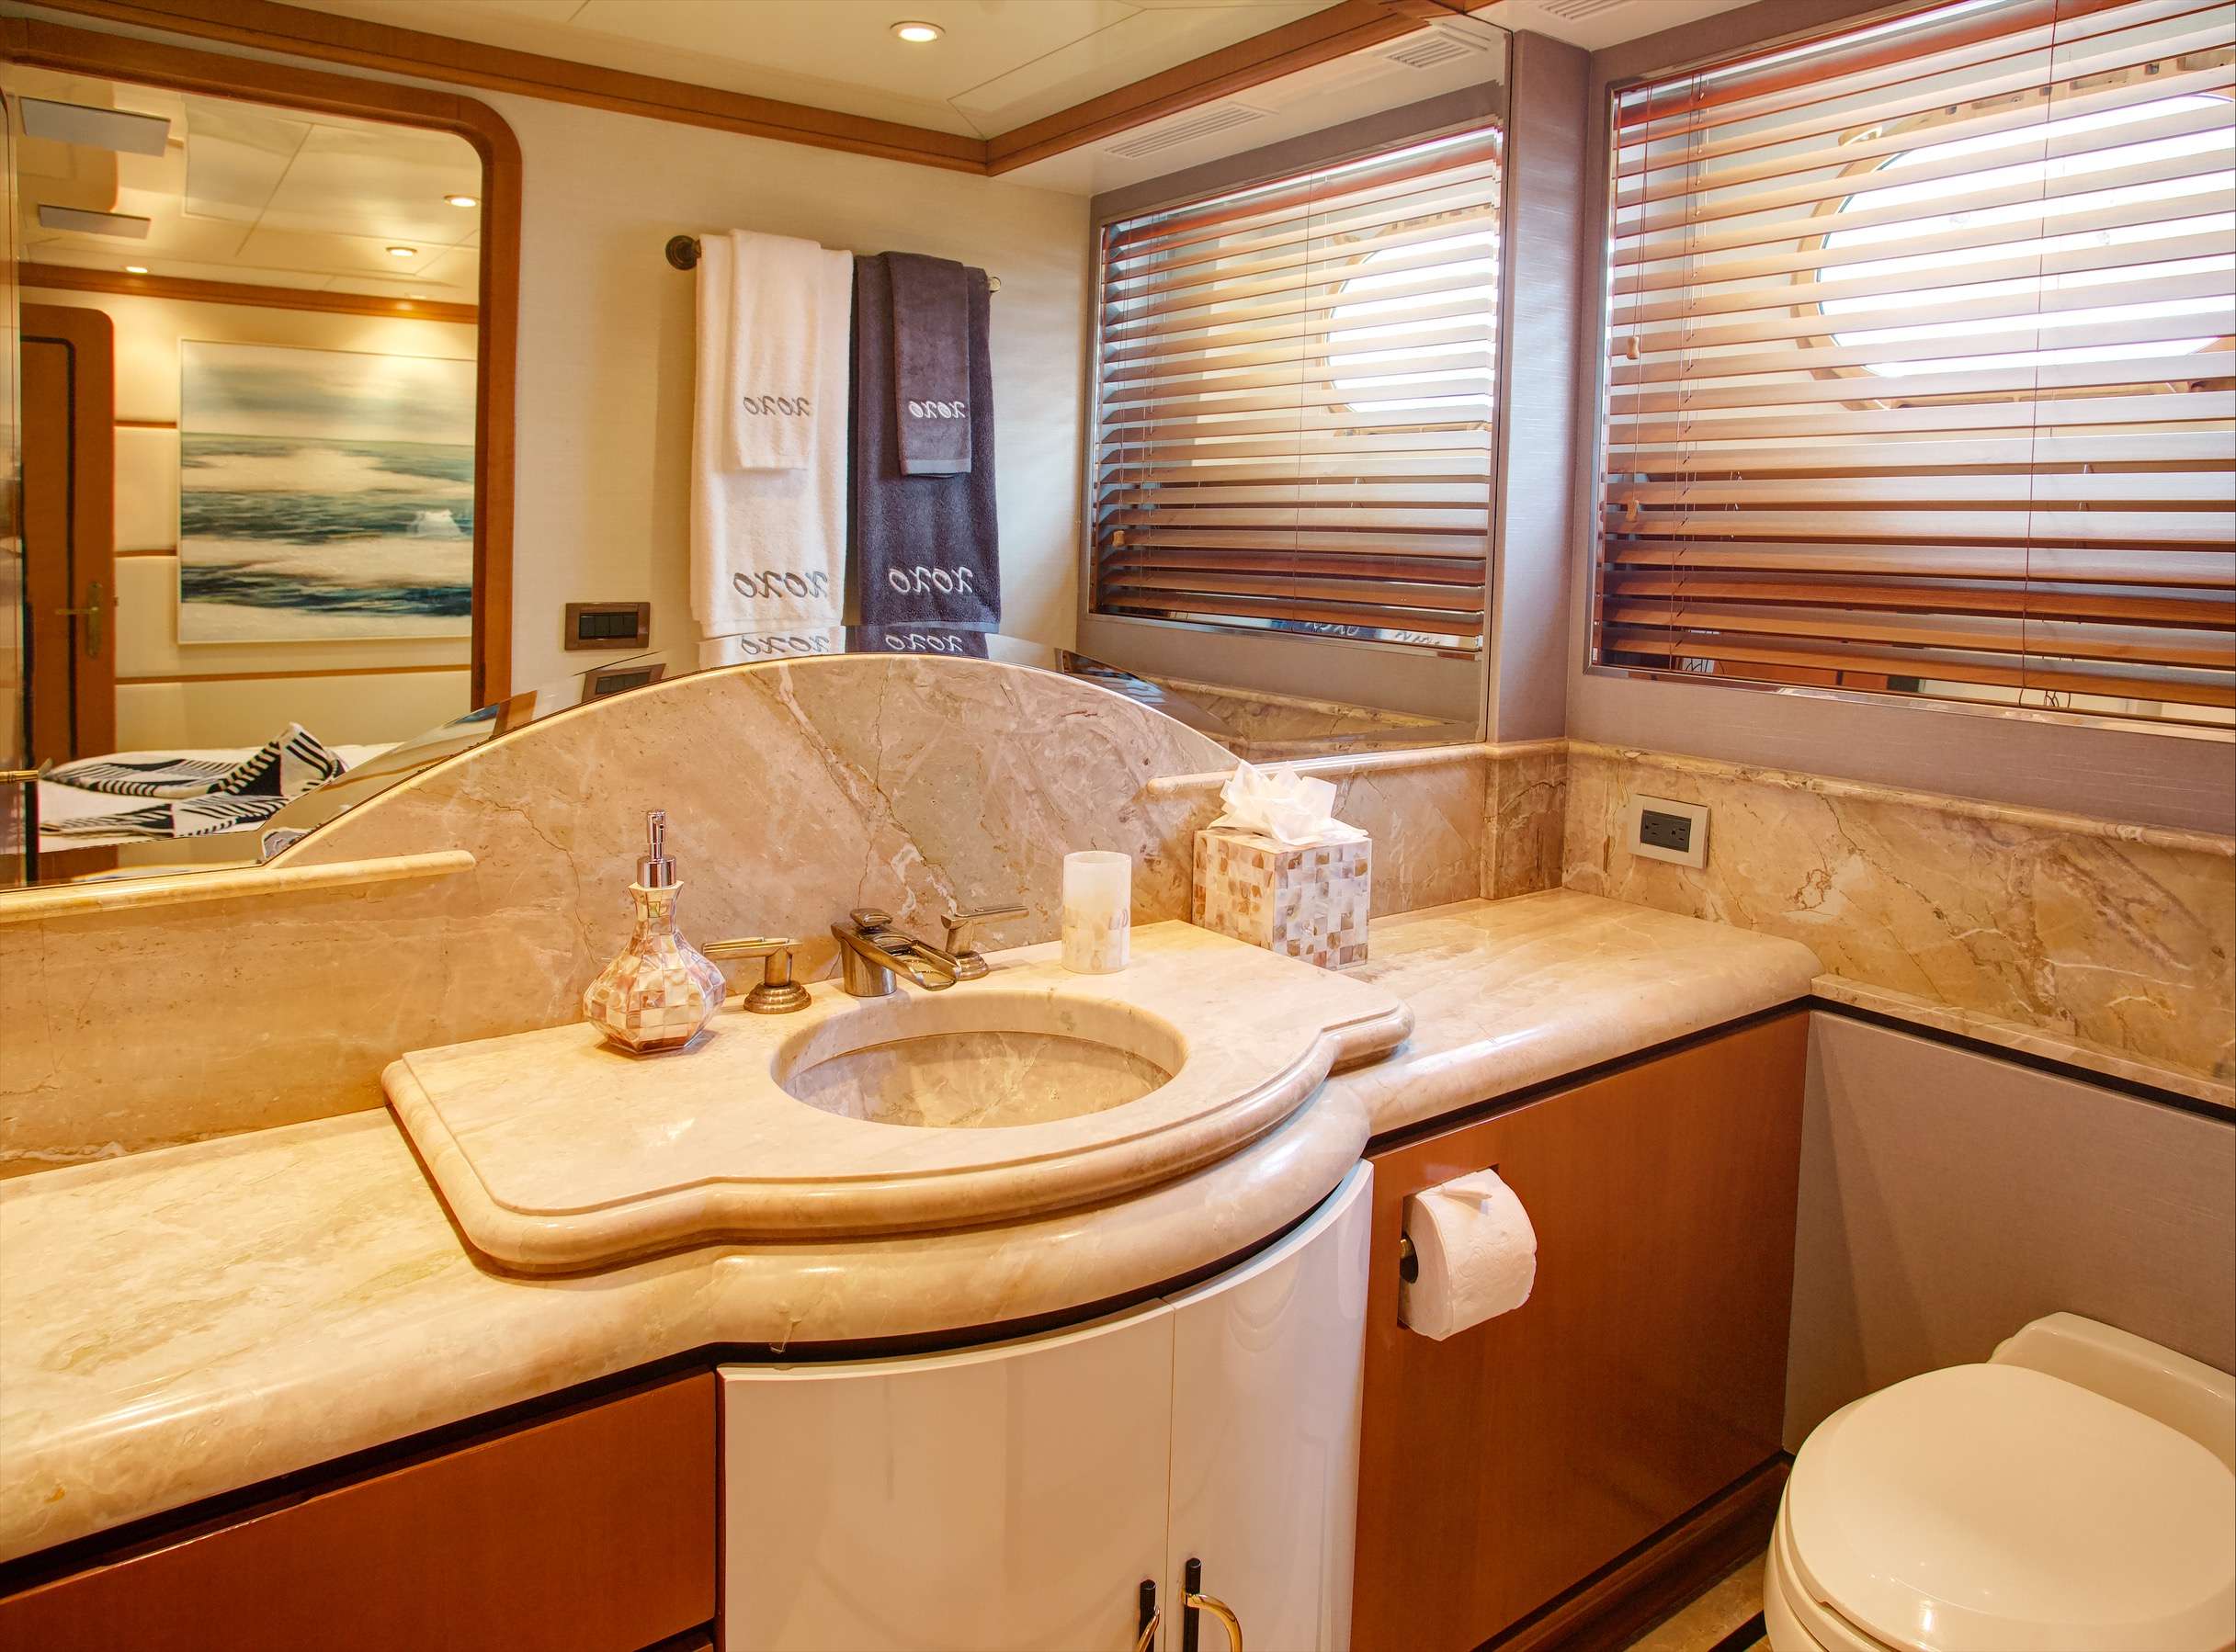 XOXO (118') Yacht Charter - Queen Guest Stateroom